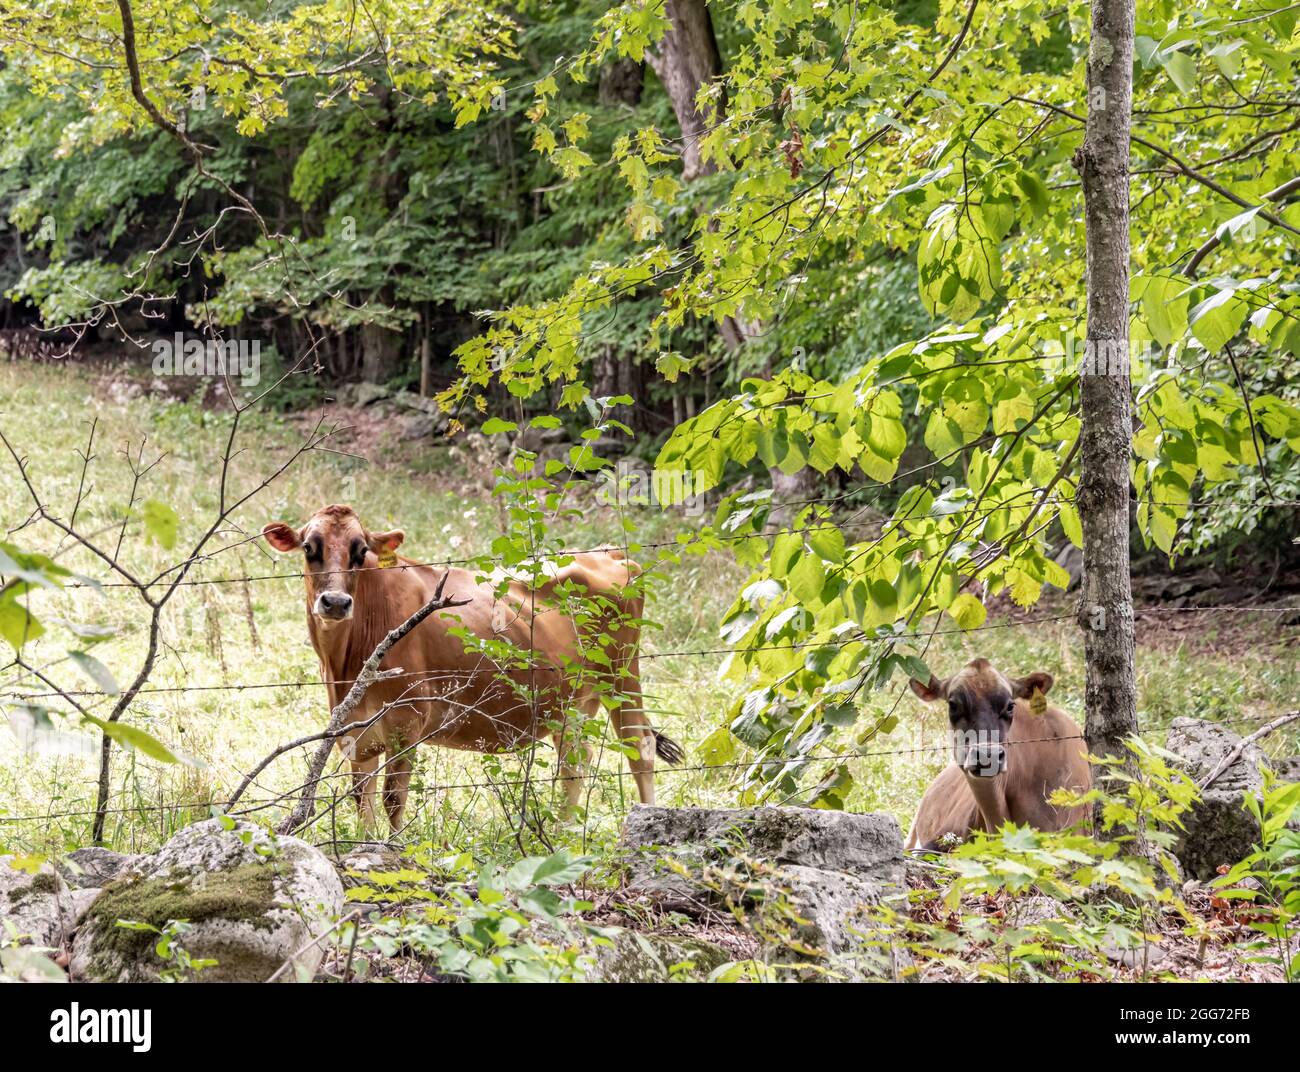 Cows in a New Hampshire field Stock Photo